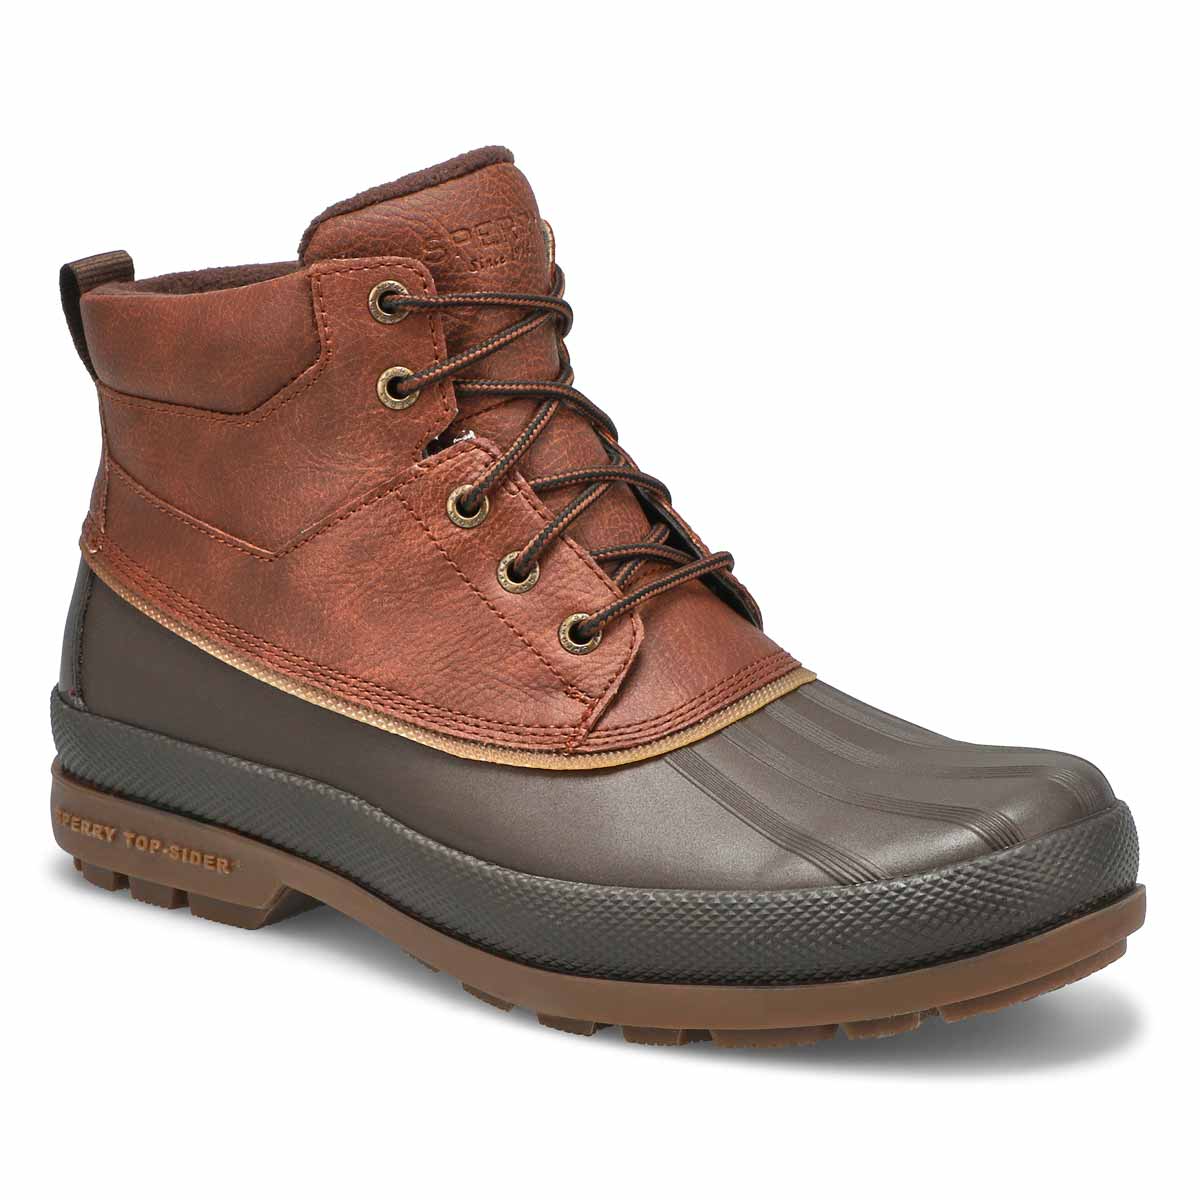 sperry insulated water resistant boots